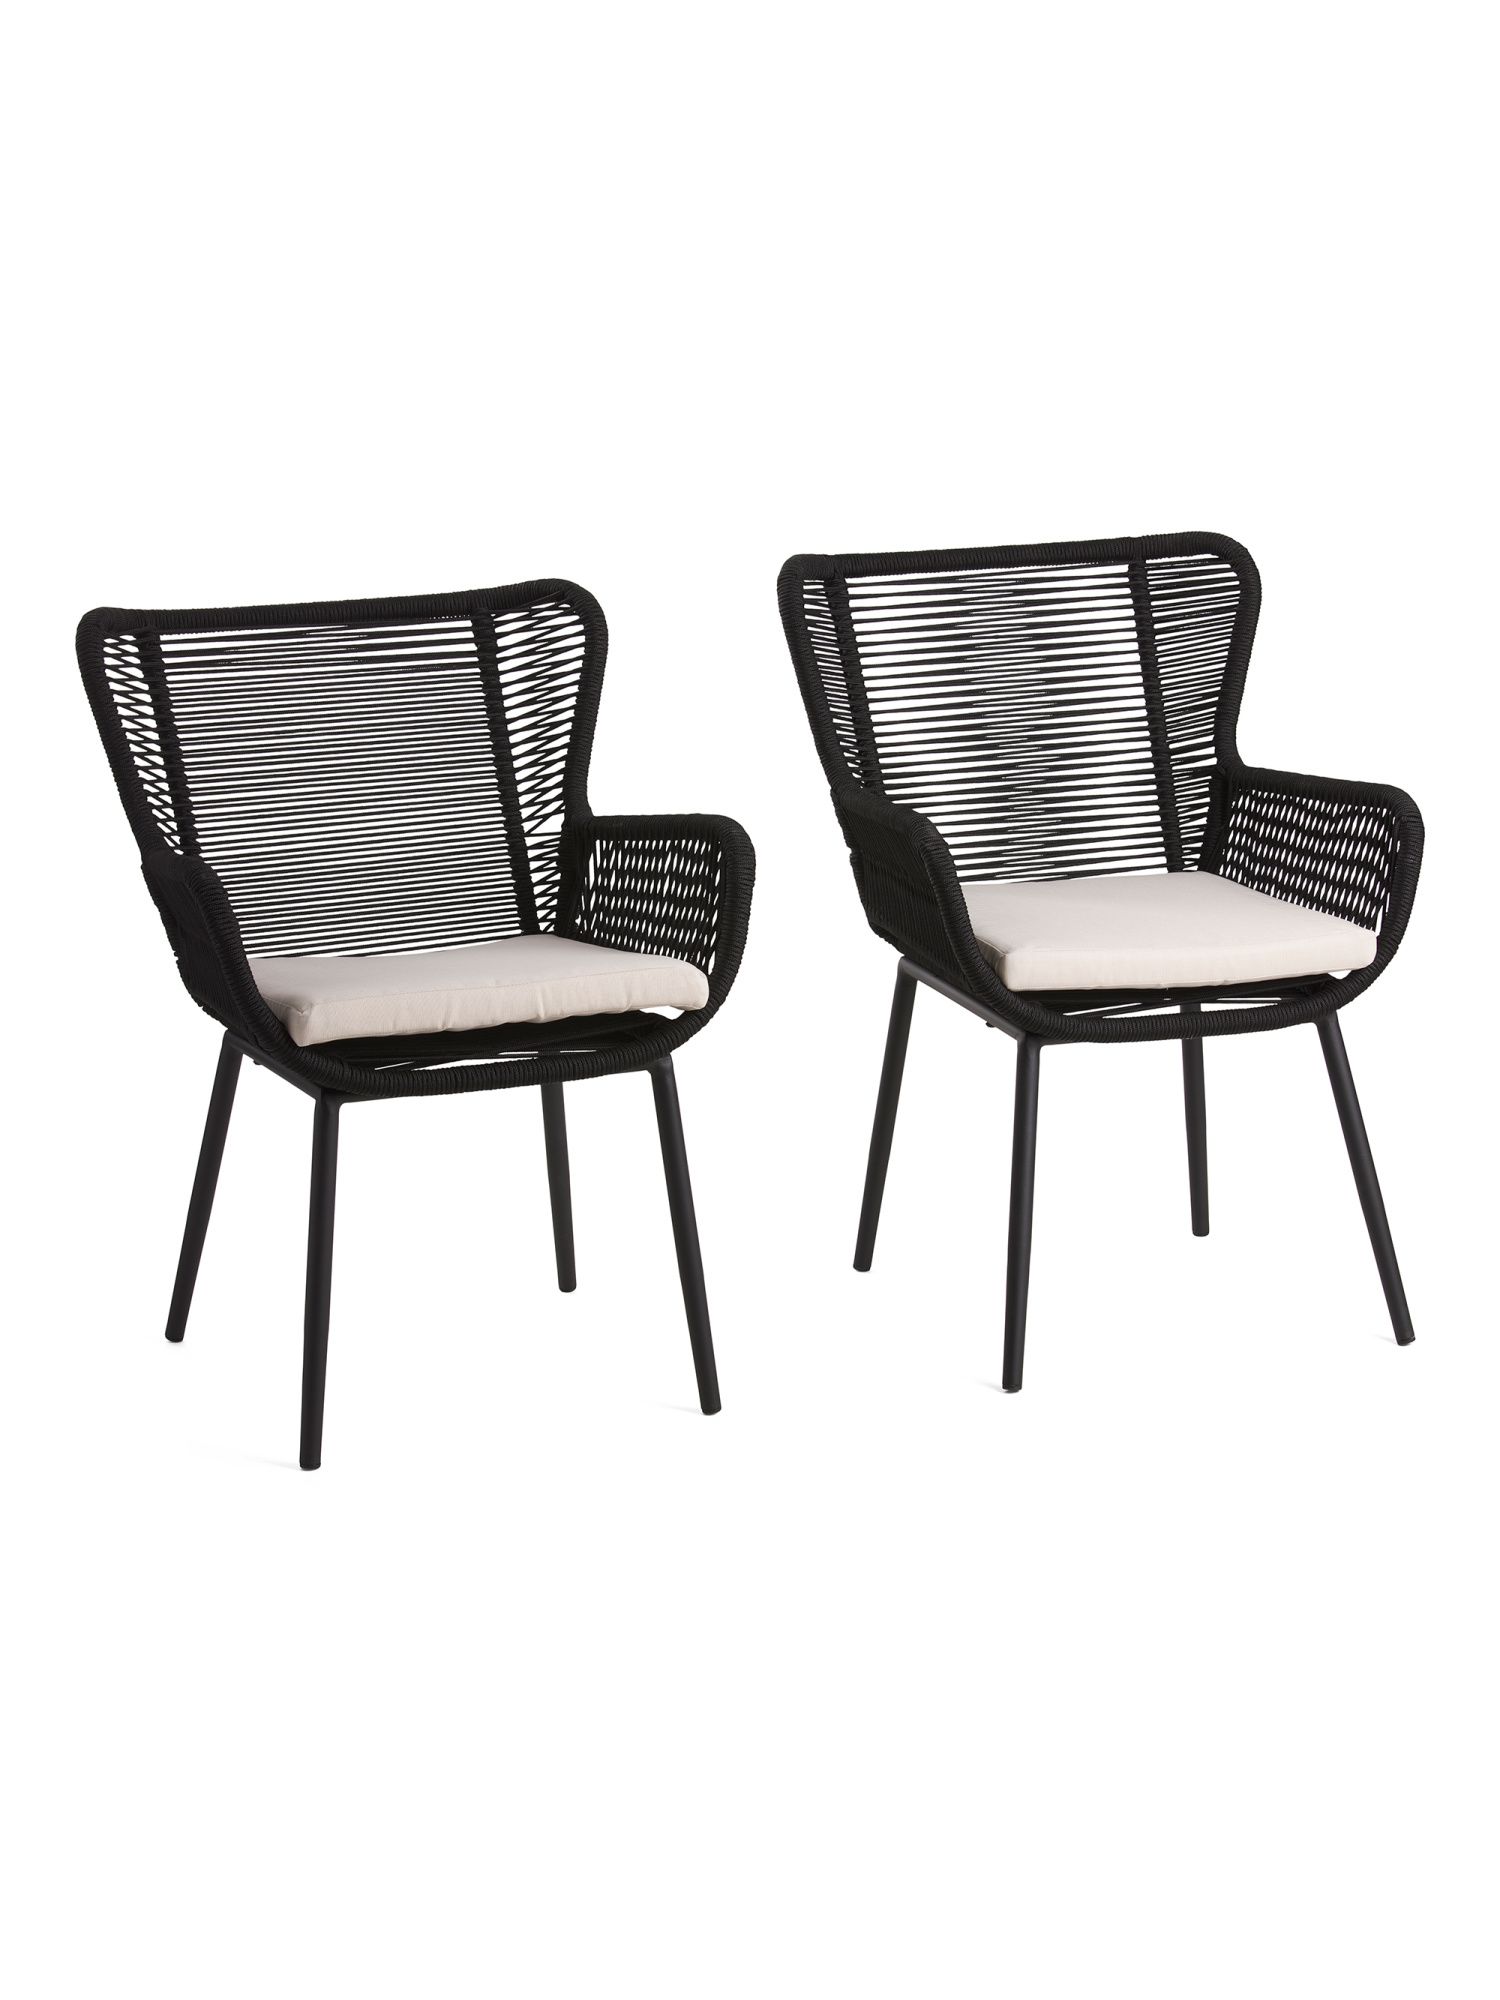 Set Of 2 Outdoor Rope Chairs | TJ Maxx